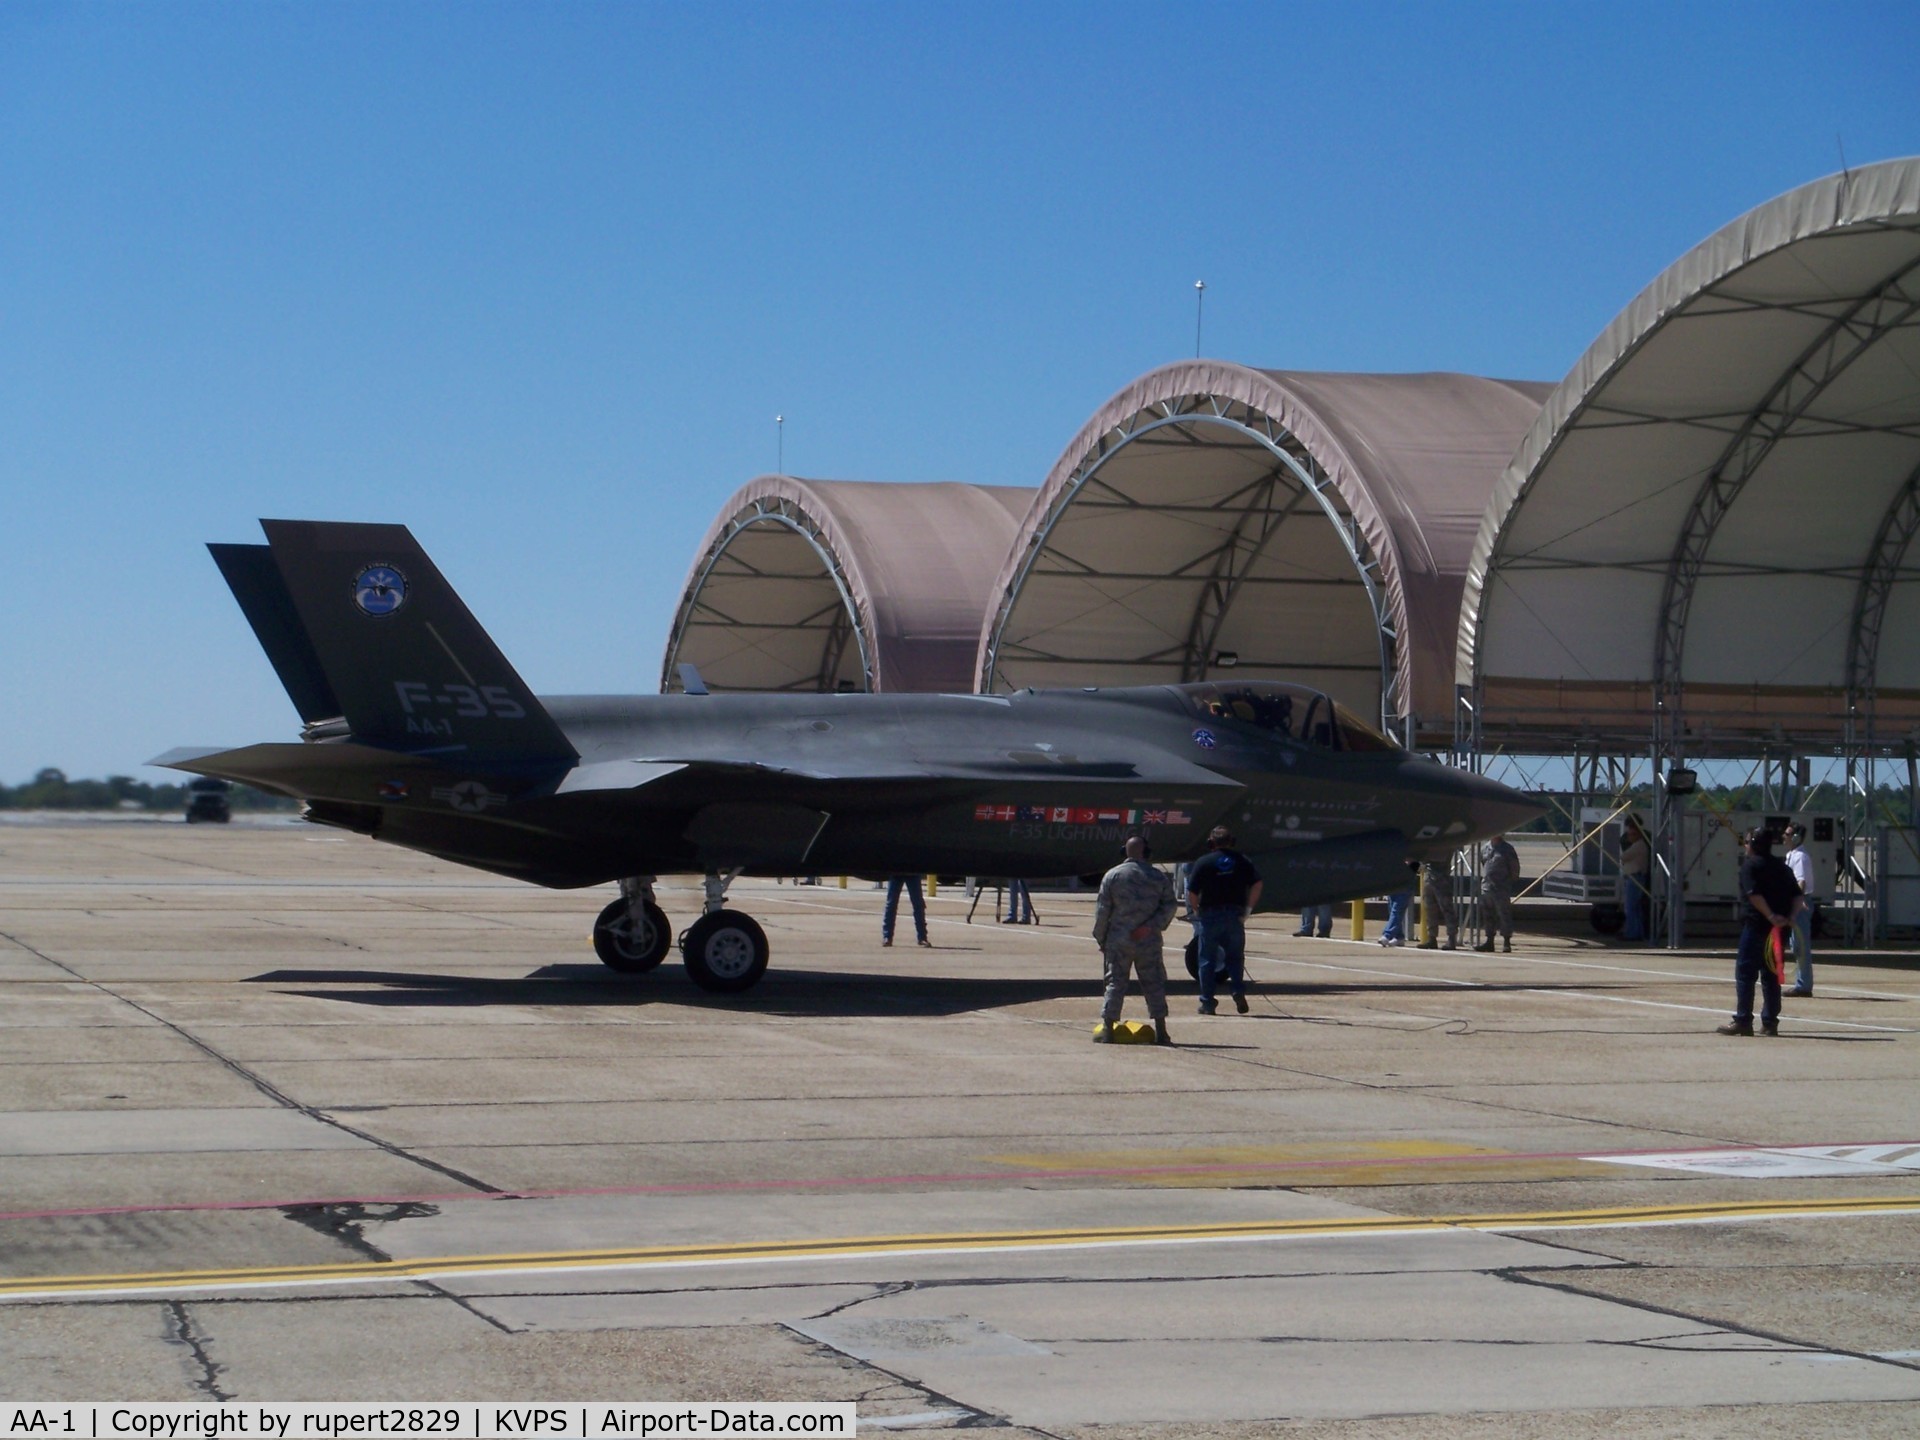 AA-1, 2006 Lockheed Martin F-35A Lightning II C/N AA-1, Contractors and Military recovering F-35 for first time at Eglin